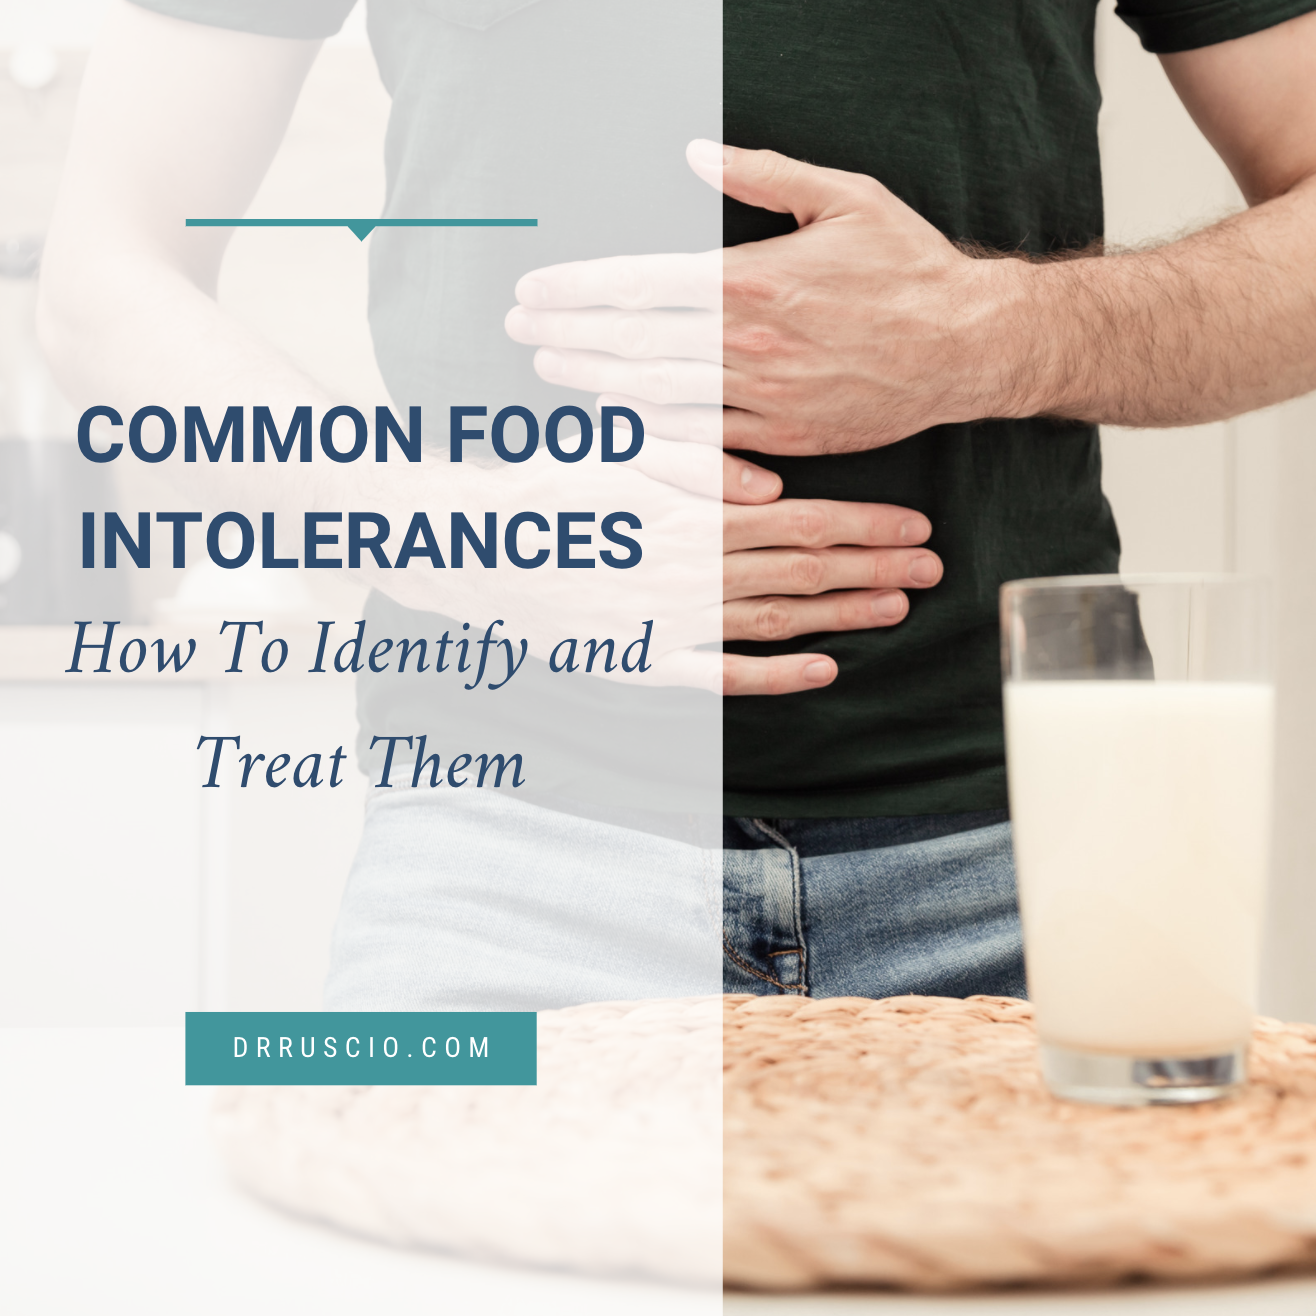 Common Food Intolerances: How to Identify and Treat Them